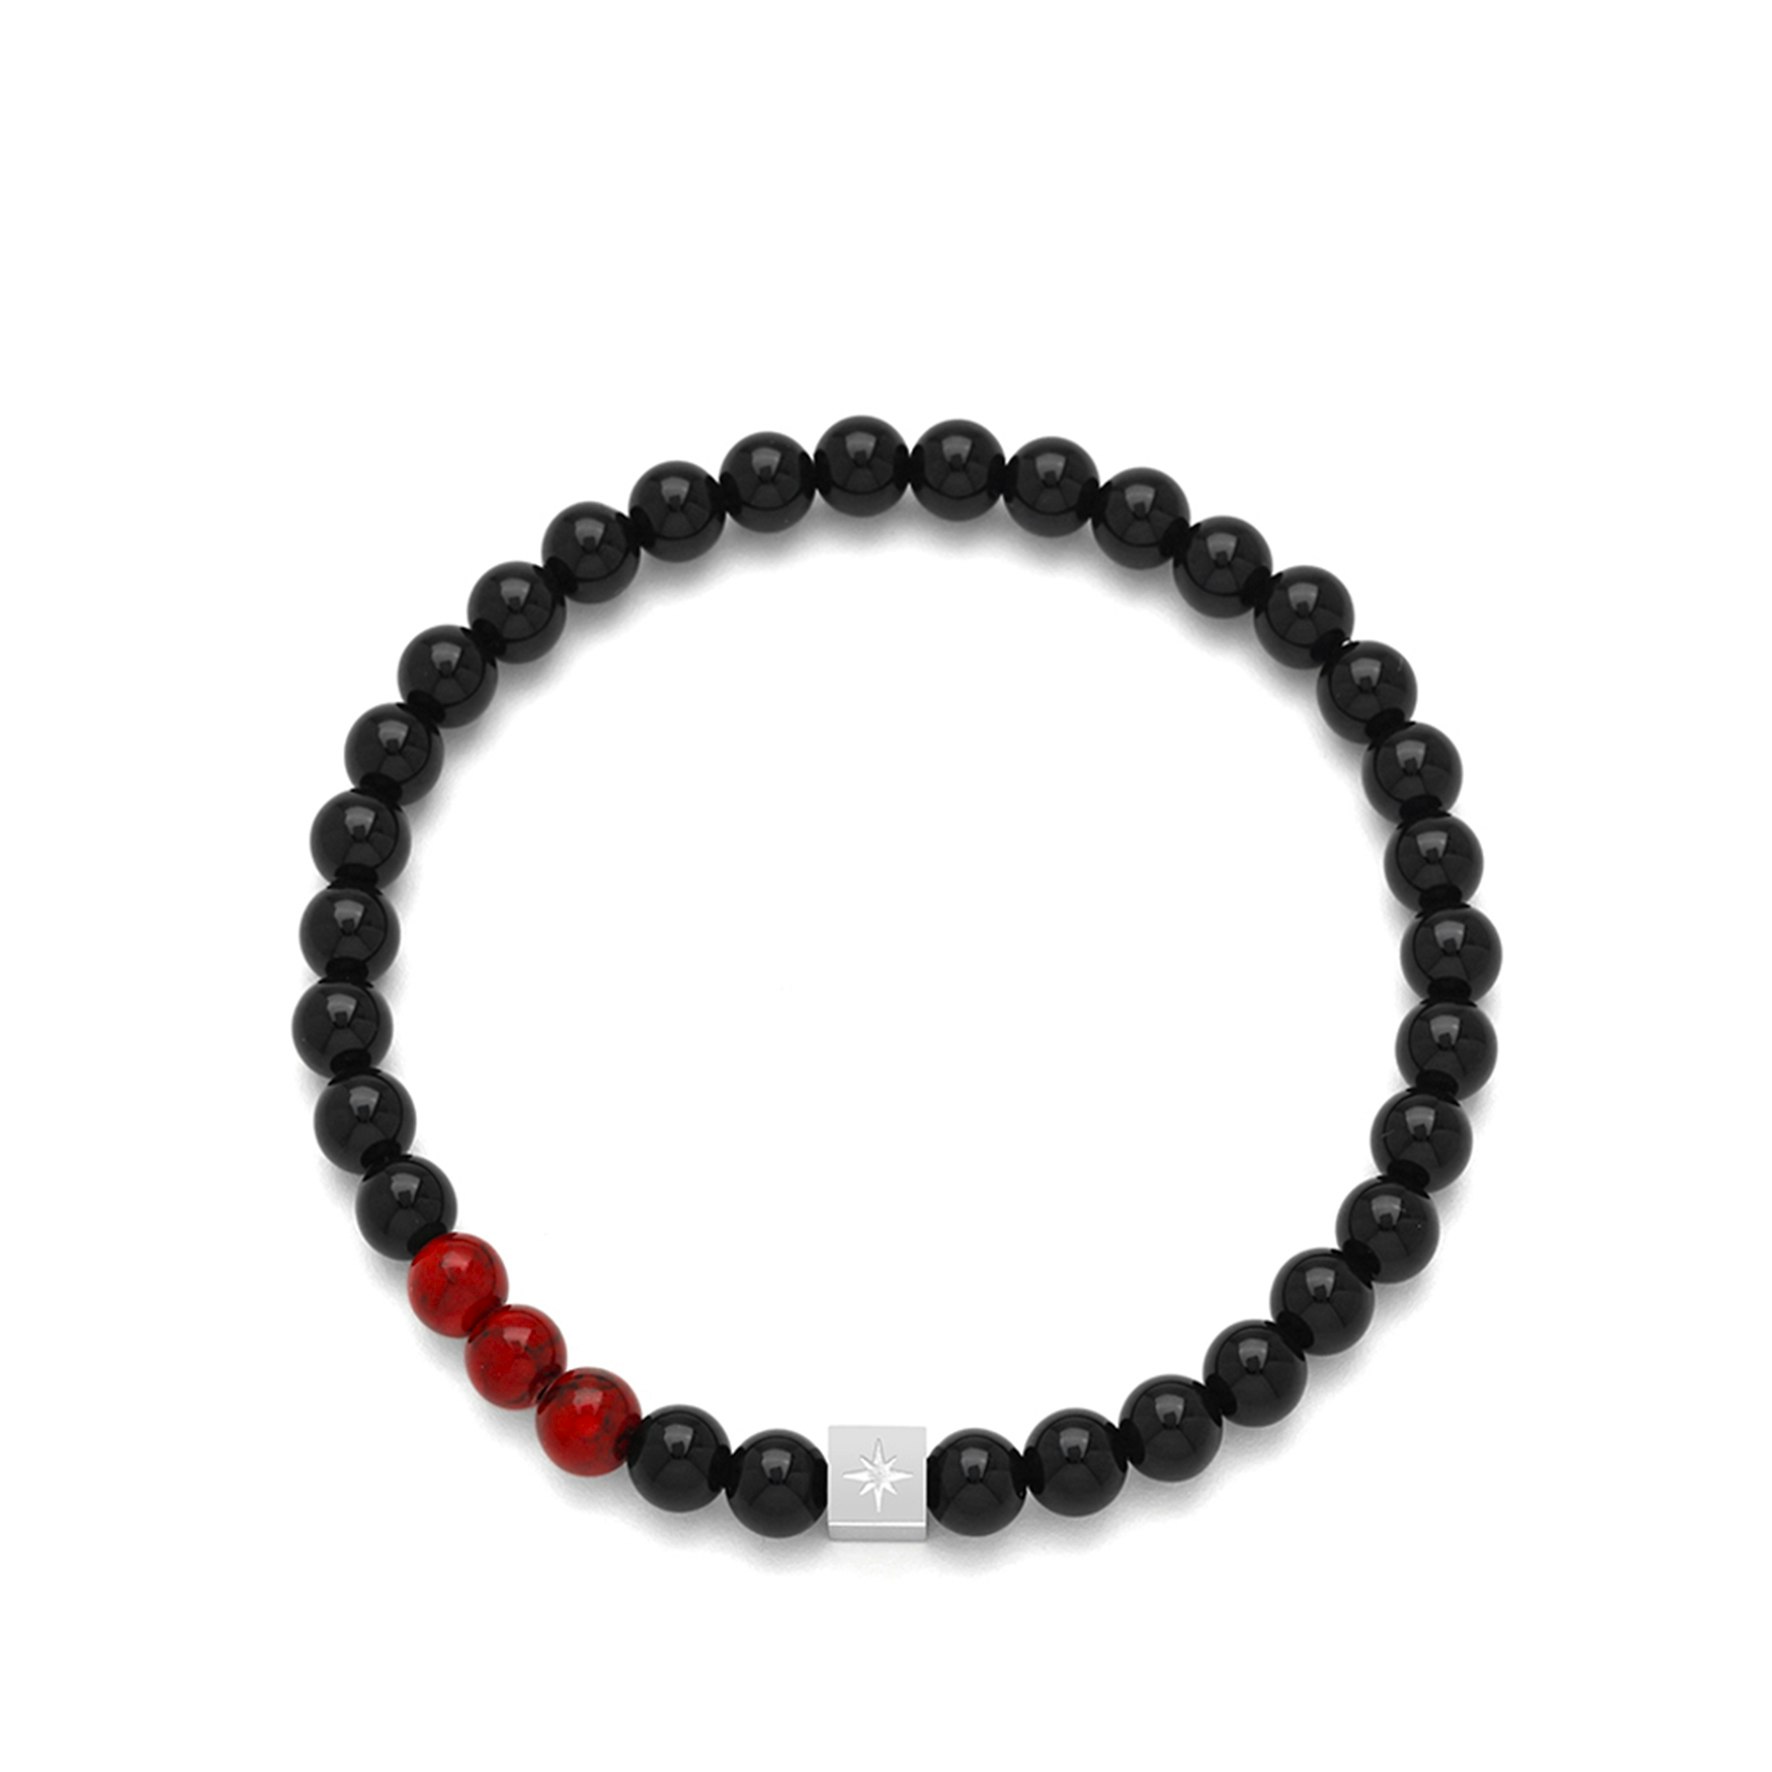 Loui Red and Black Bracelet from SAMIE in Stainless steel